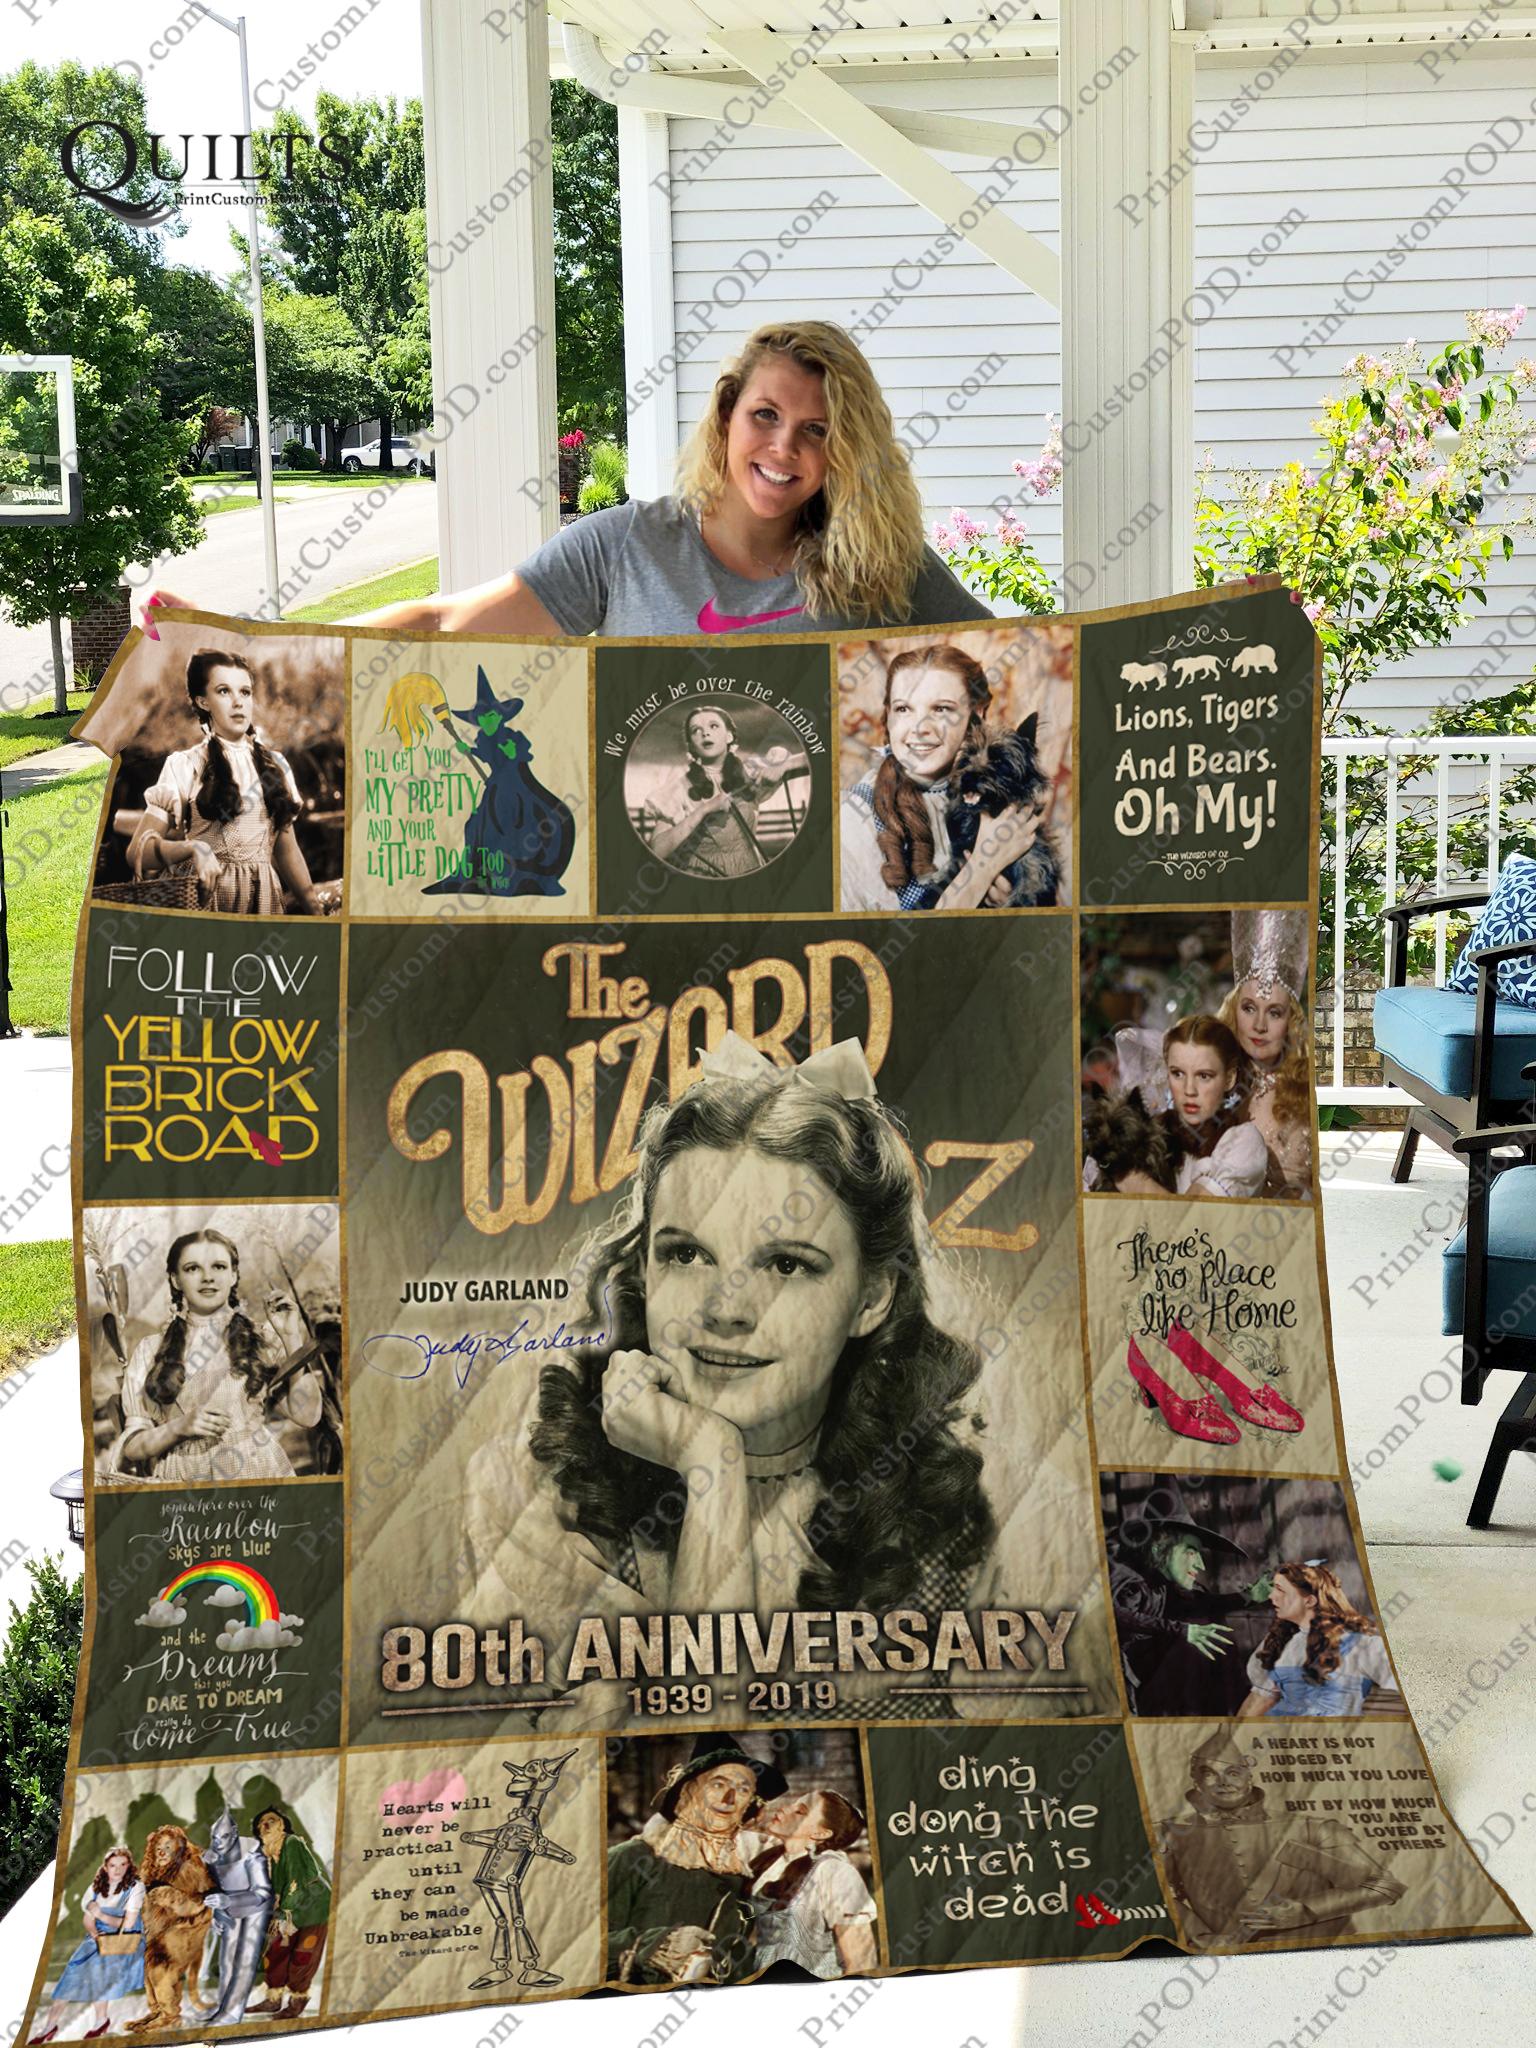 The wizard of oz judy garland 80th anniversary quilt - throw